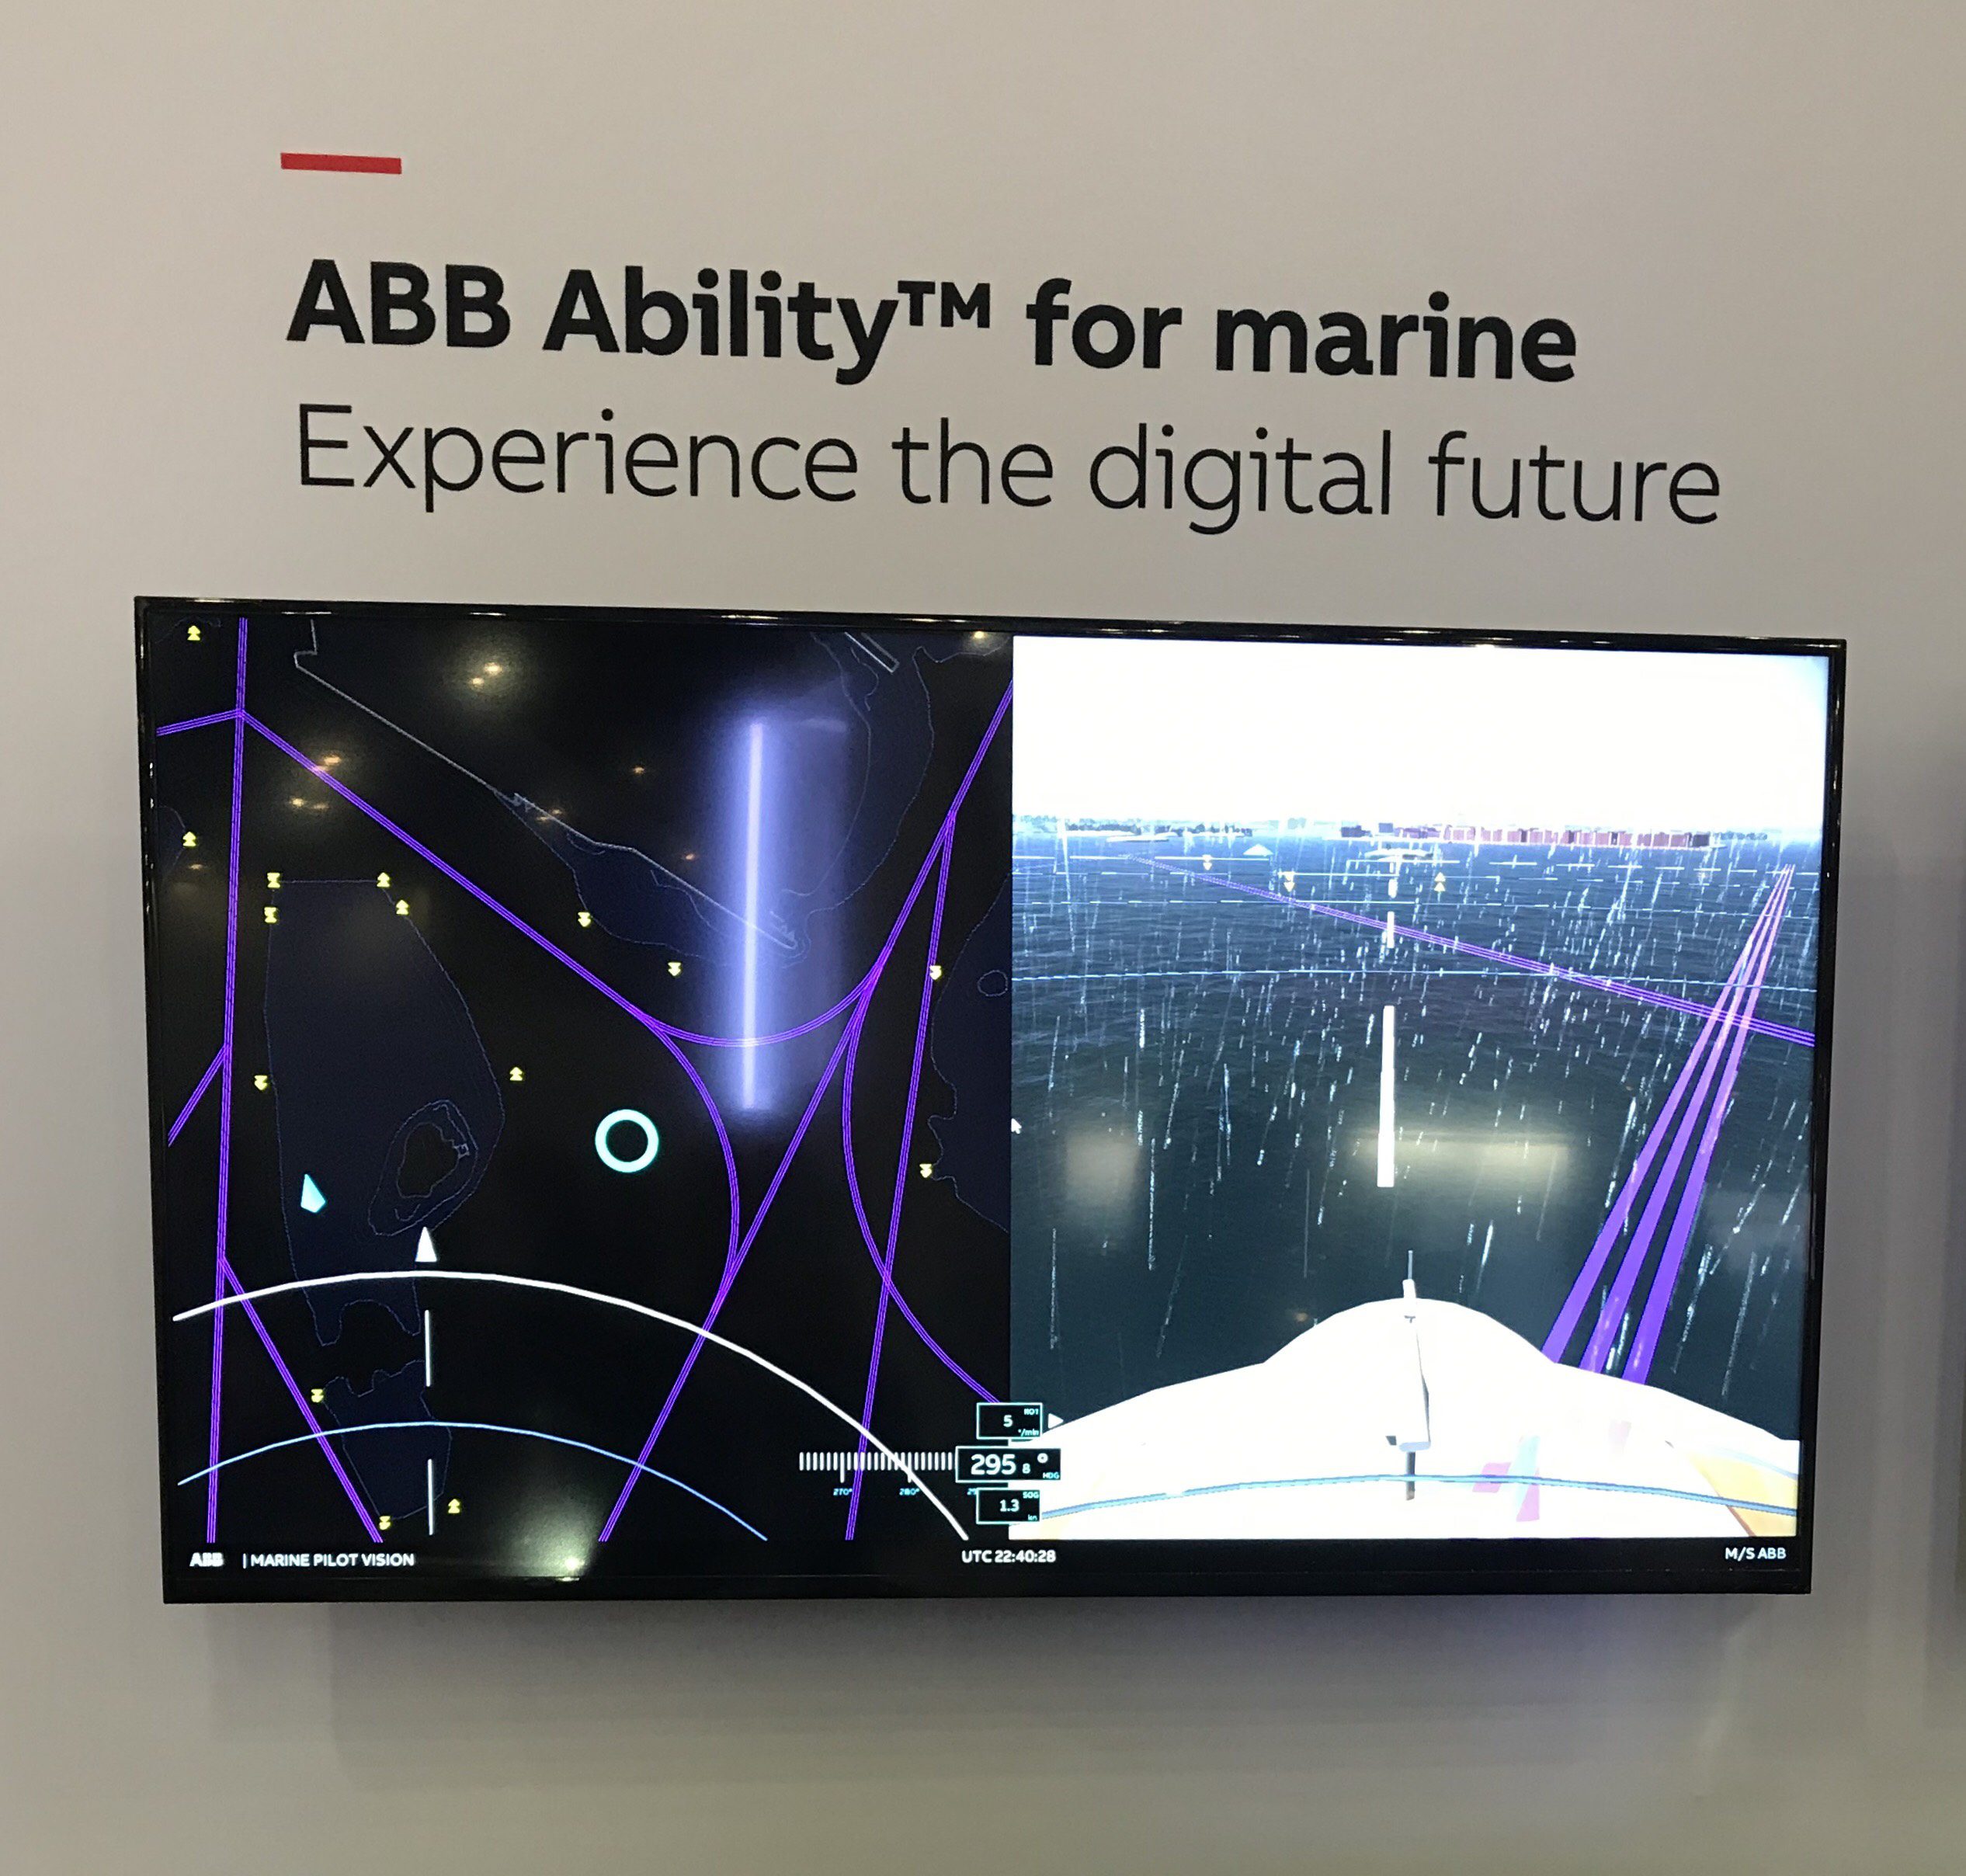 ABB Ability™ Marine Pilot Vision looks beyond human vision for ship automation